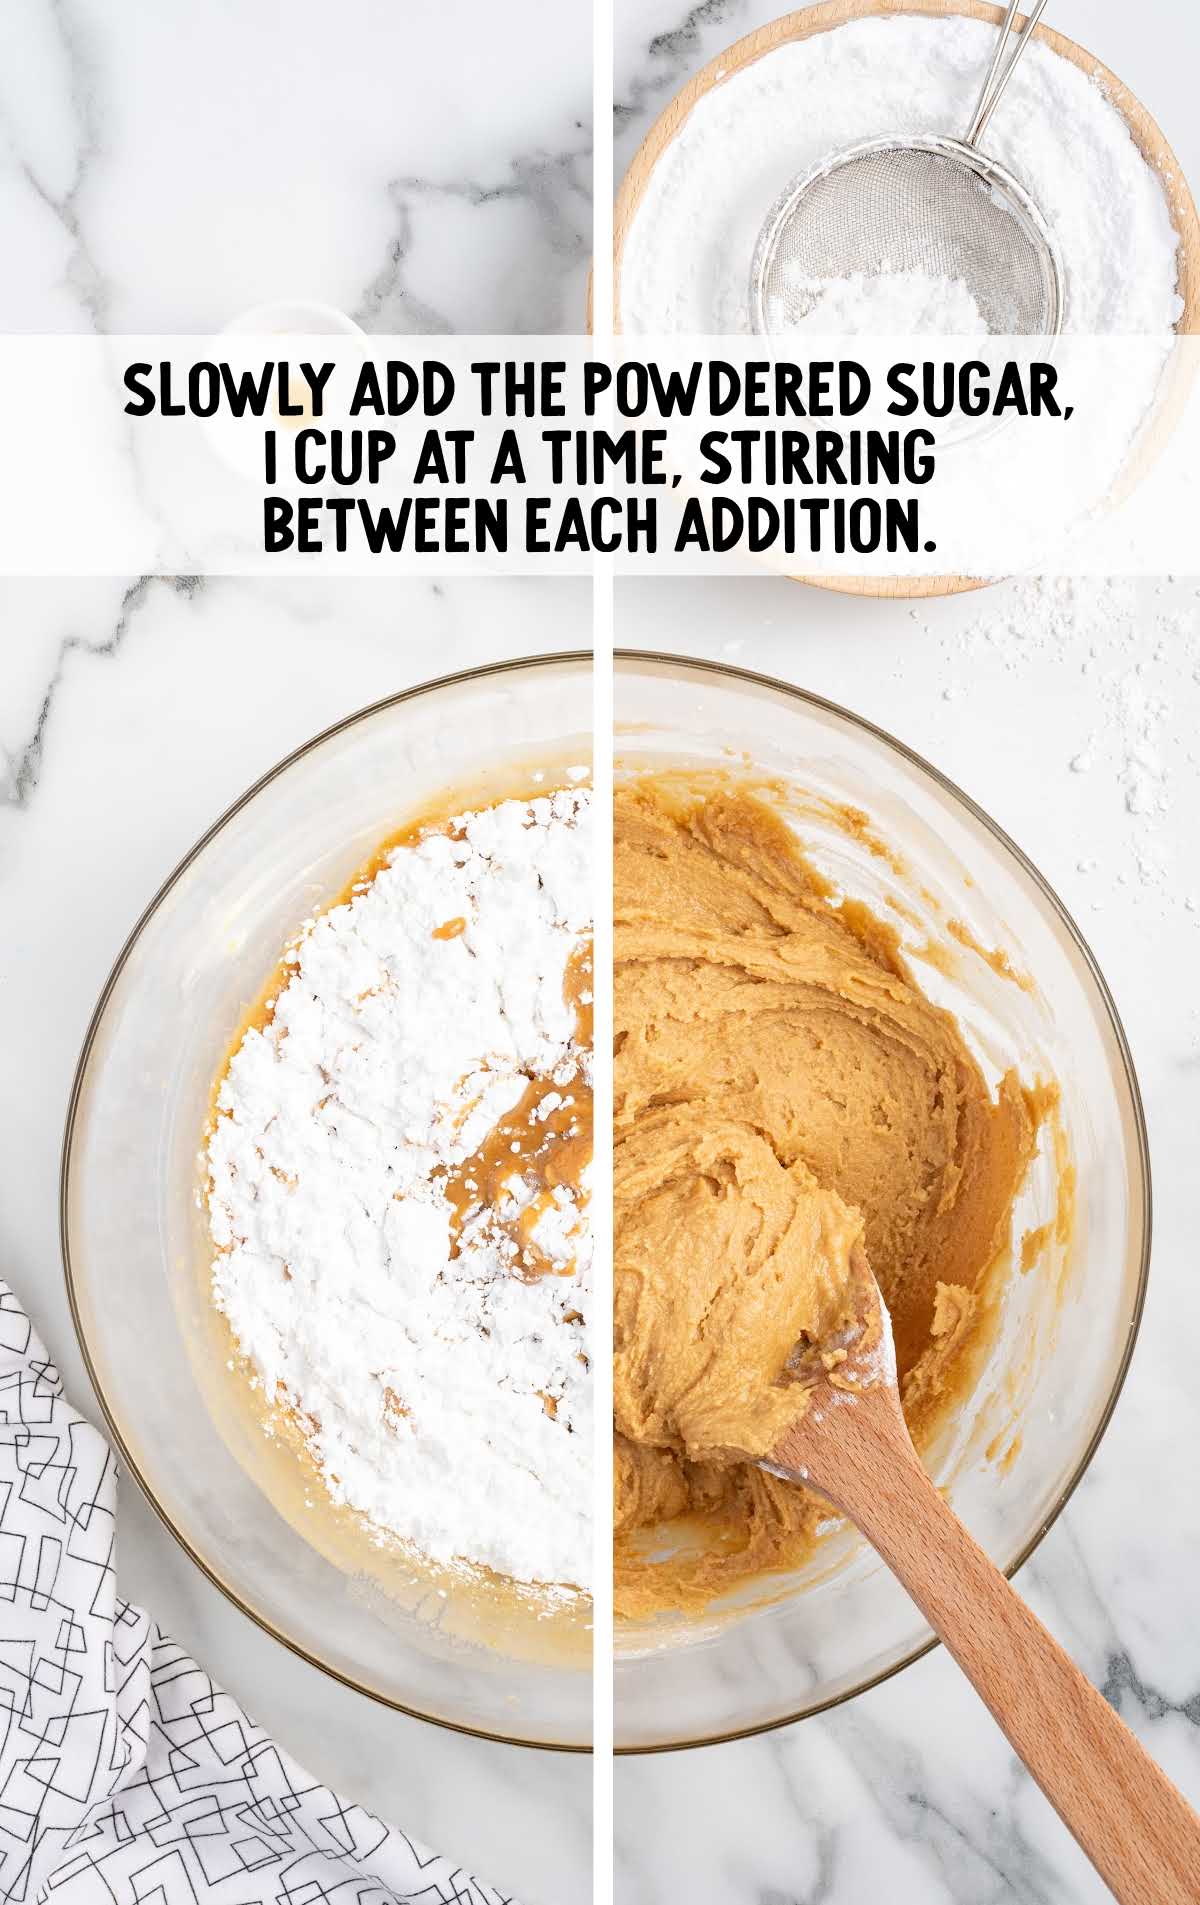 powdered sugar added to the peanut butter mixture in a bowl